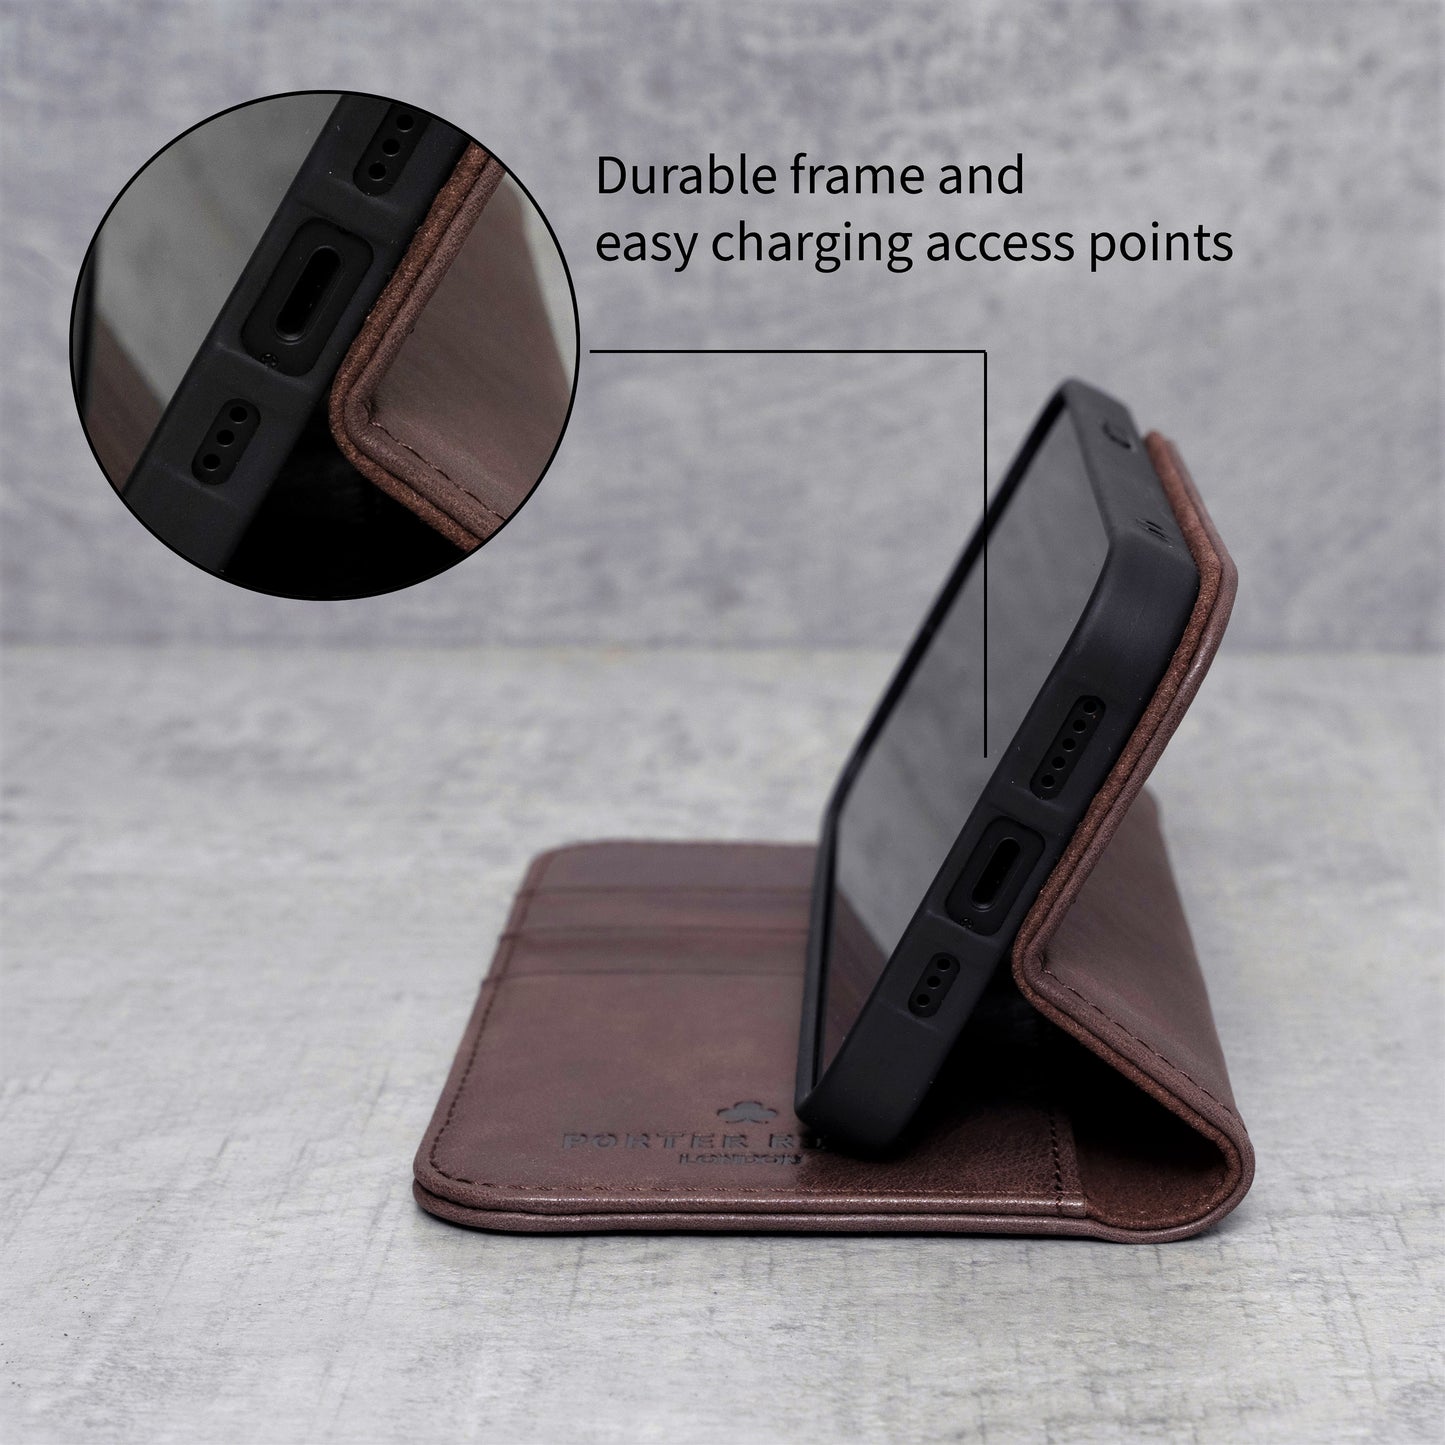 iPhone 11 Pro Max Leather Case. Premium Slim Genuine Leather Stand Case/Cover/Wallet (Chocolate Brown)